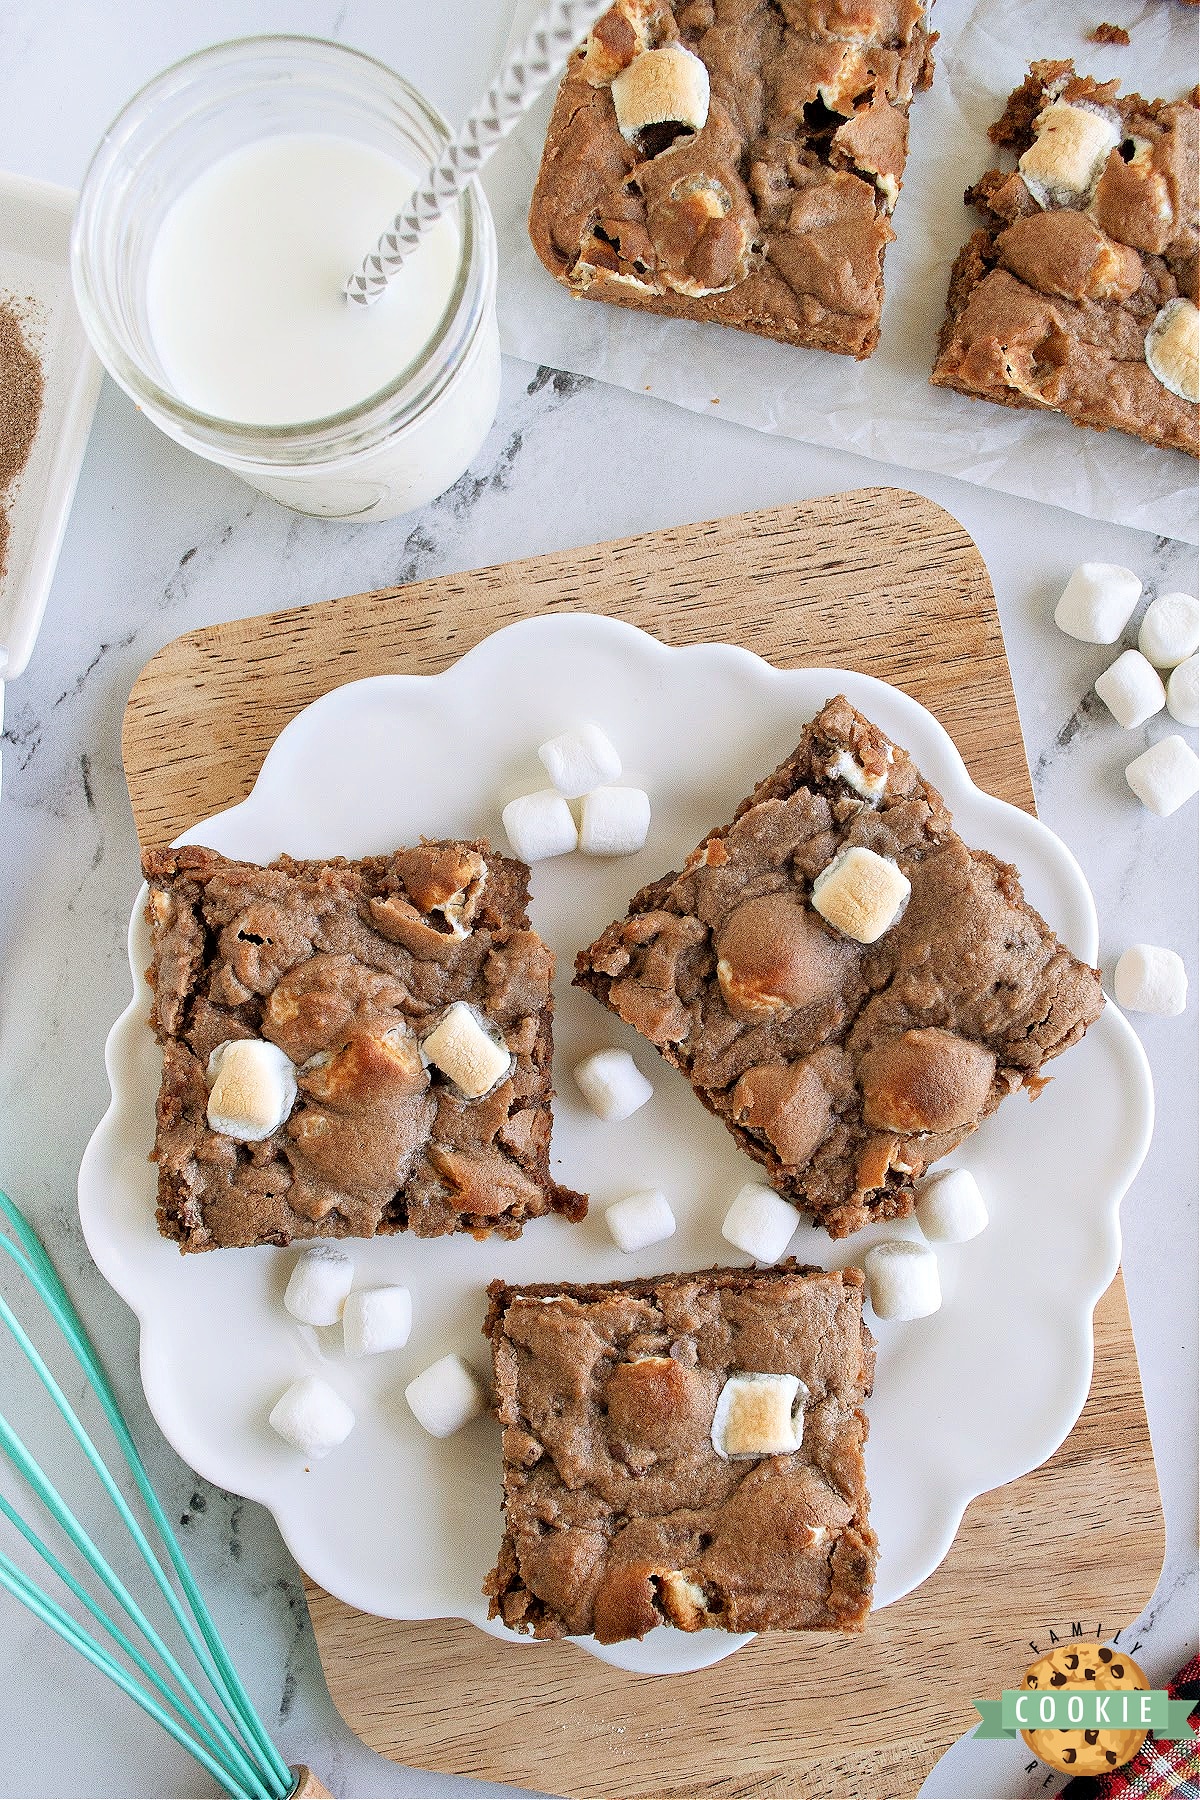 Swiss Miss Chocolate Chip Cookie Bars are made with hot cocoa mix, marshmallows and chocolate chips! Soft and chewy cookie bar recipe that tastes like a cup of hot chocolate! 